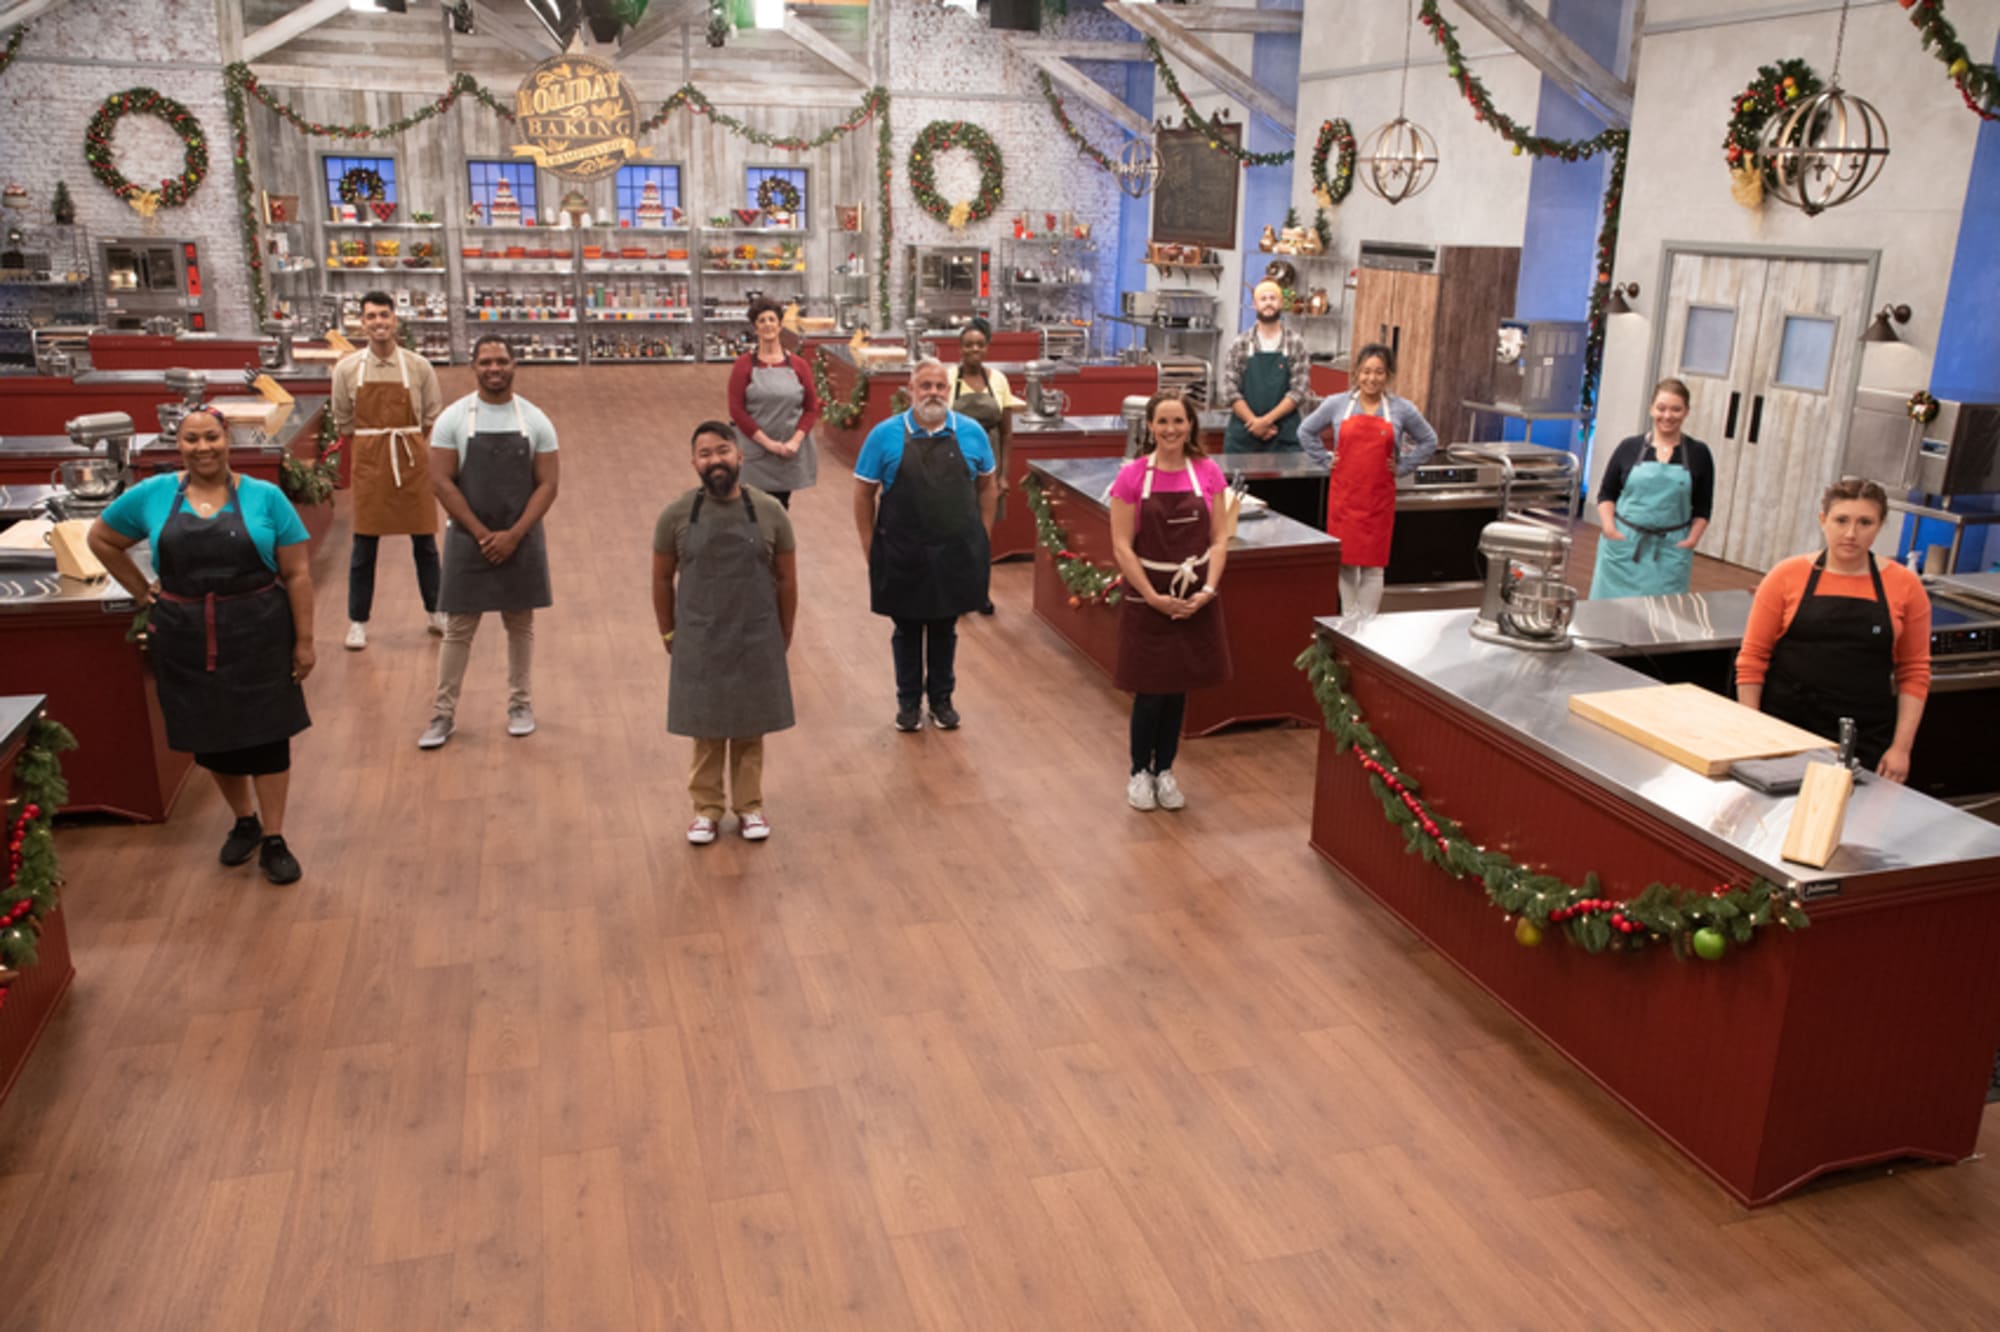 Holiday Baking Championship premiere Who made the naughty list?